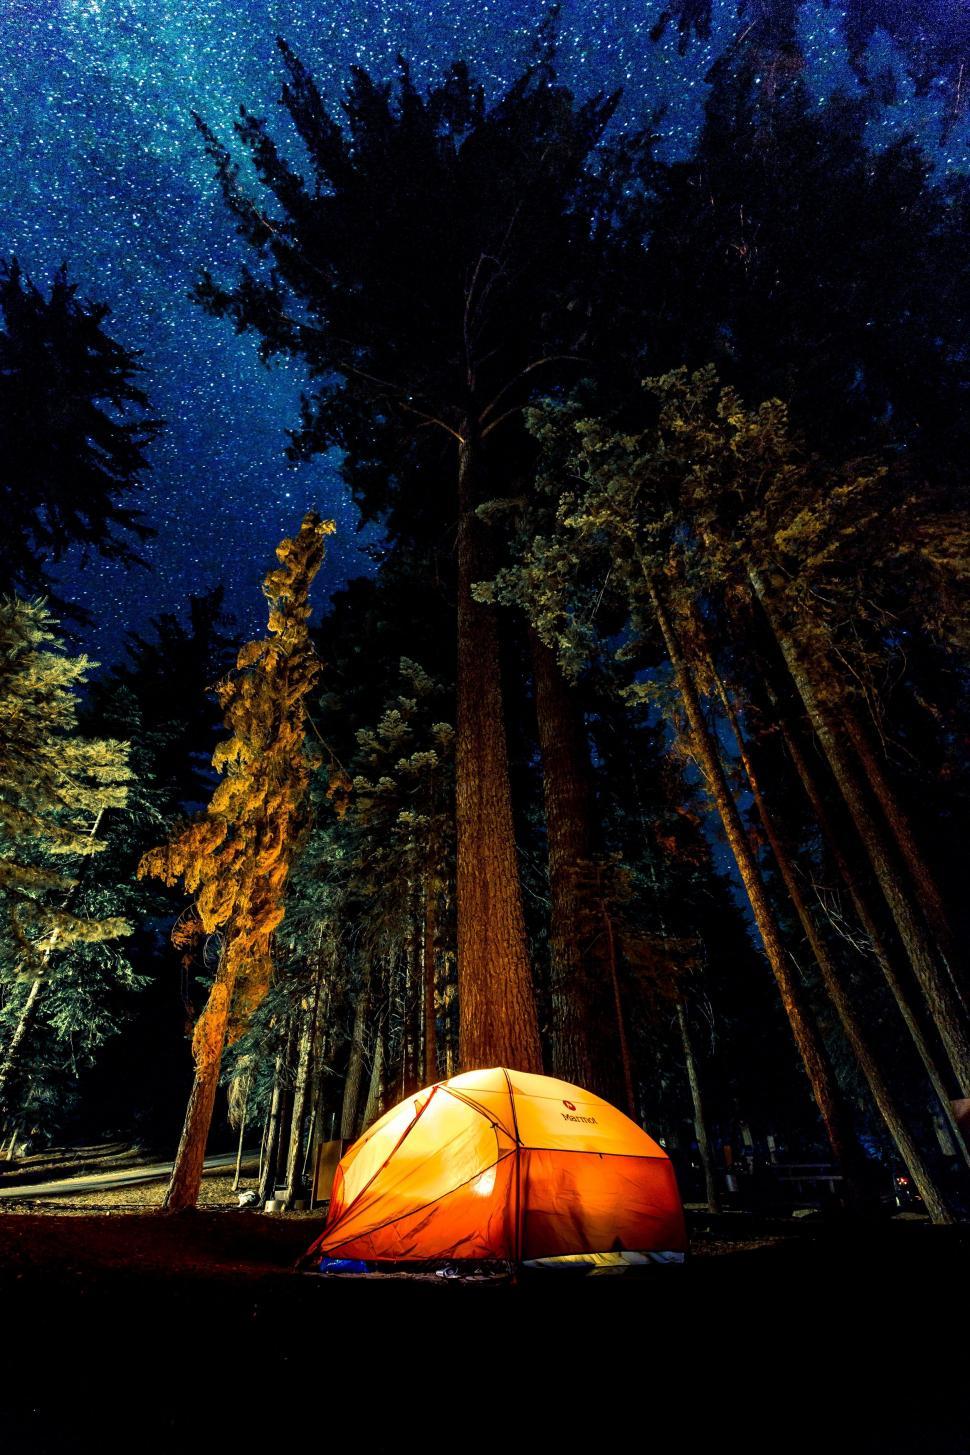 Free Image of Camping tent under night sky  